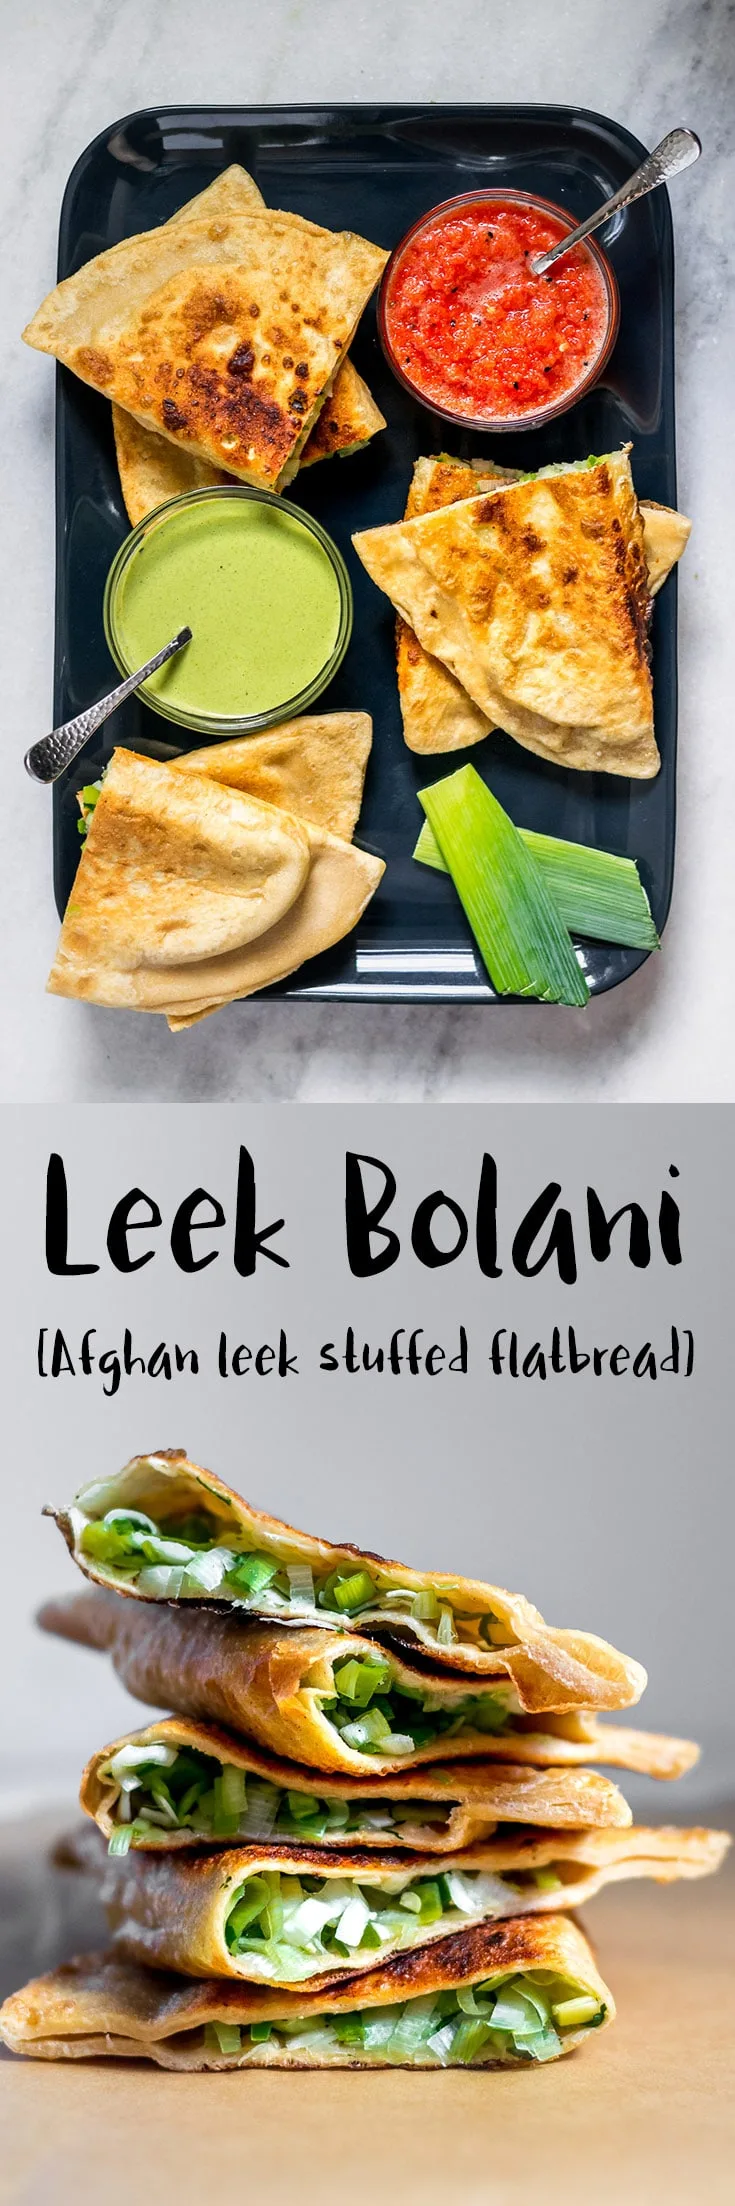 Leek Bolani are a delicious oniony and peppery stuffed flatbread from Afghanistan. They're easy to make and perfect to serve as a snack or appetizer alongside some chutney for dipping. | thecuriouschickpea.com #vegan #Afghanfood